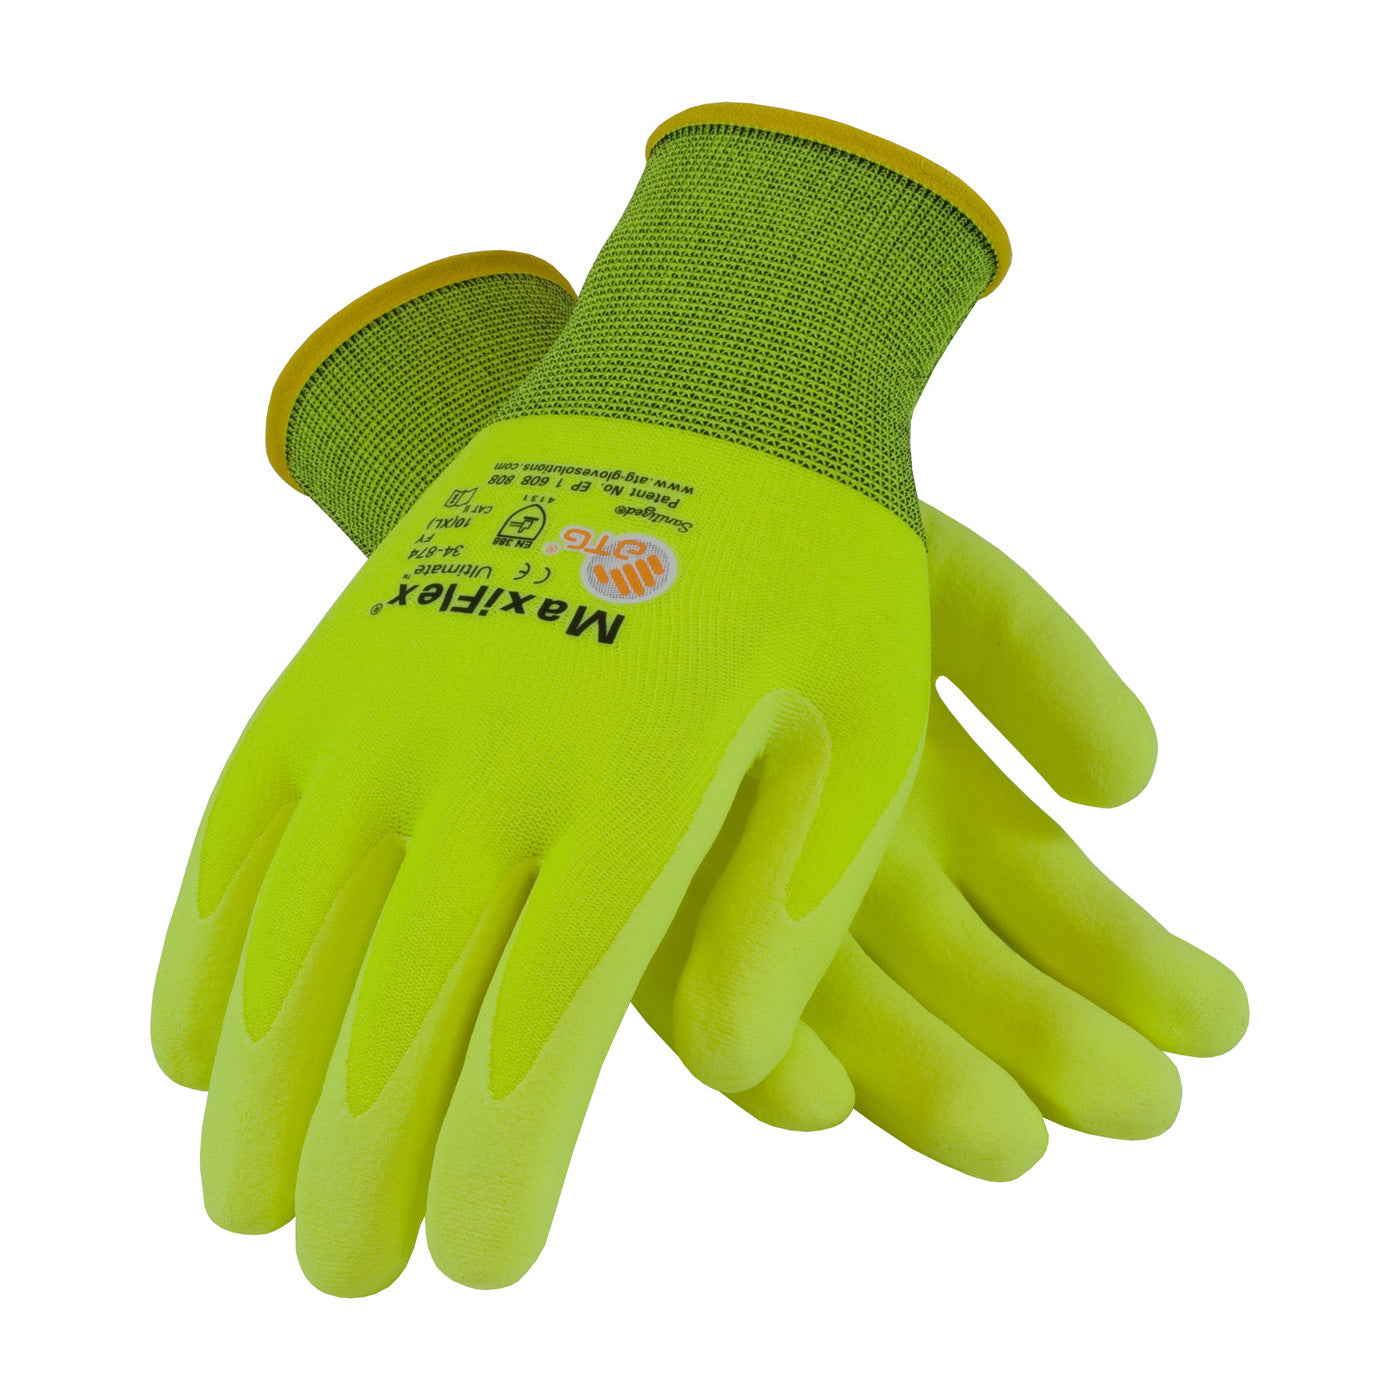 PIP 34-874FY MaxiFlex Ultimate Hi-Vis Seamless Knit Nylon/Lycra Gloves with Nitrile Coated Palm & Fingers (12 Pairs)-eSafety Supplies, Inc